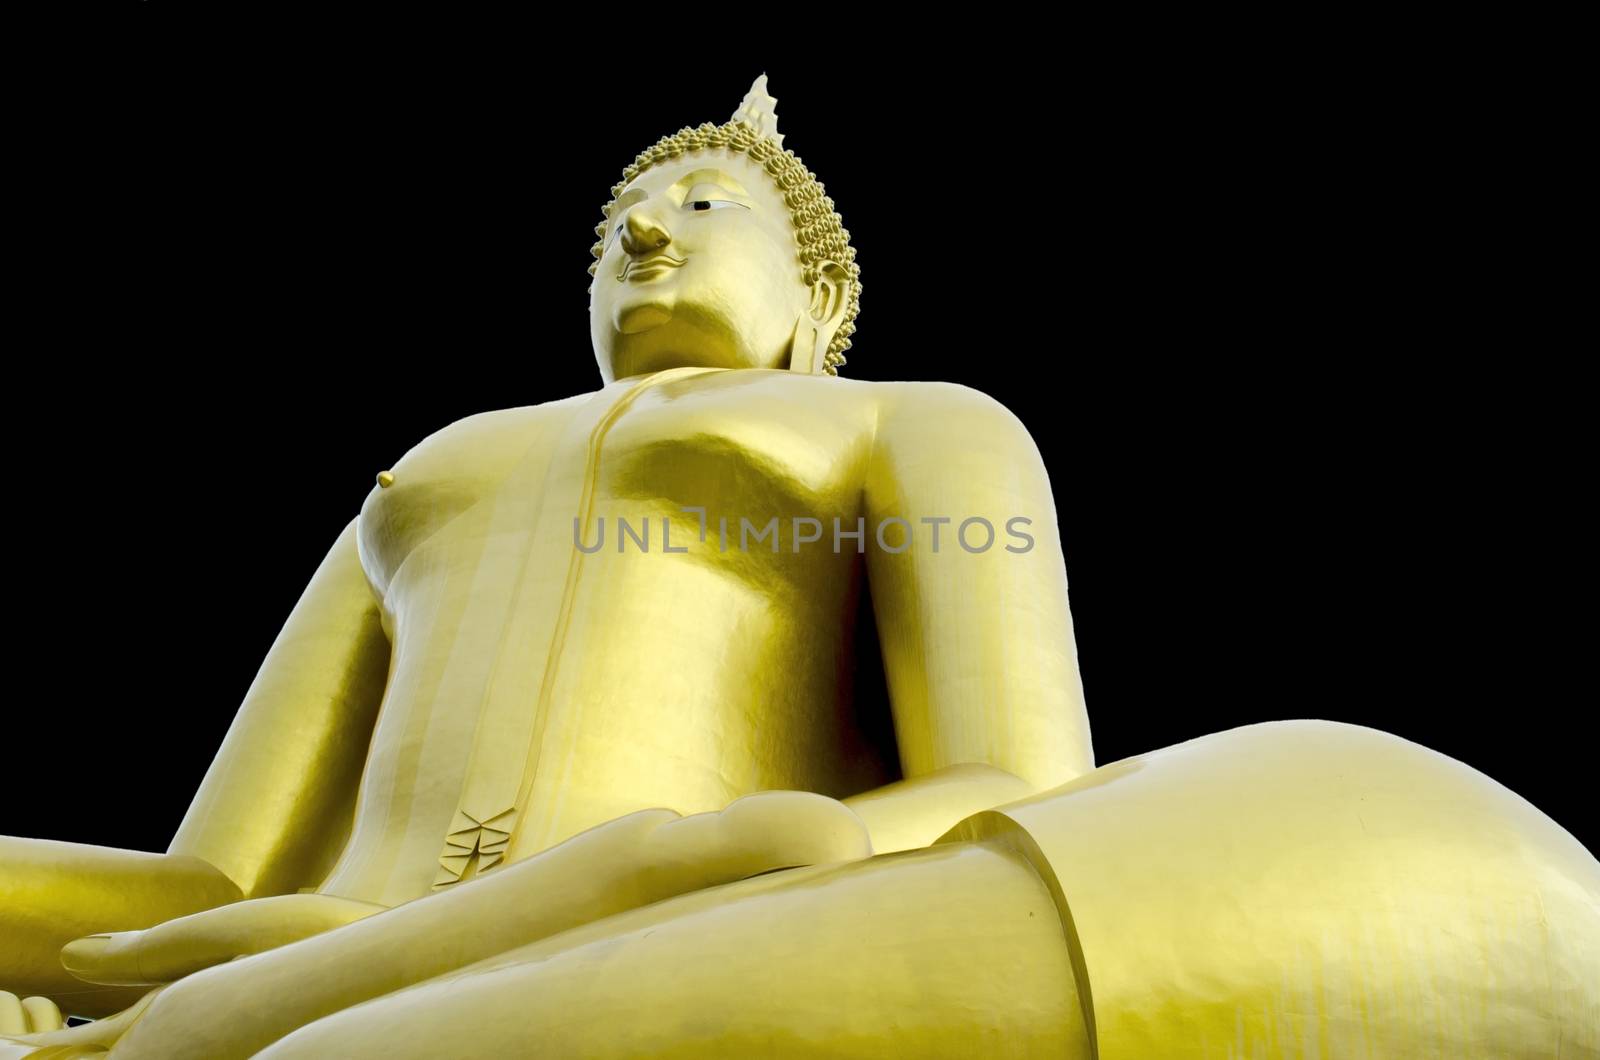 Golden Seated Buddha Image on Solid Black Background by kobfujar